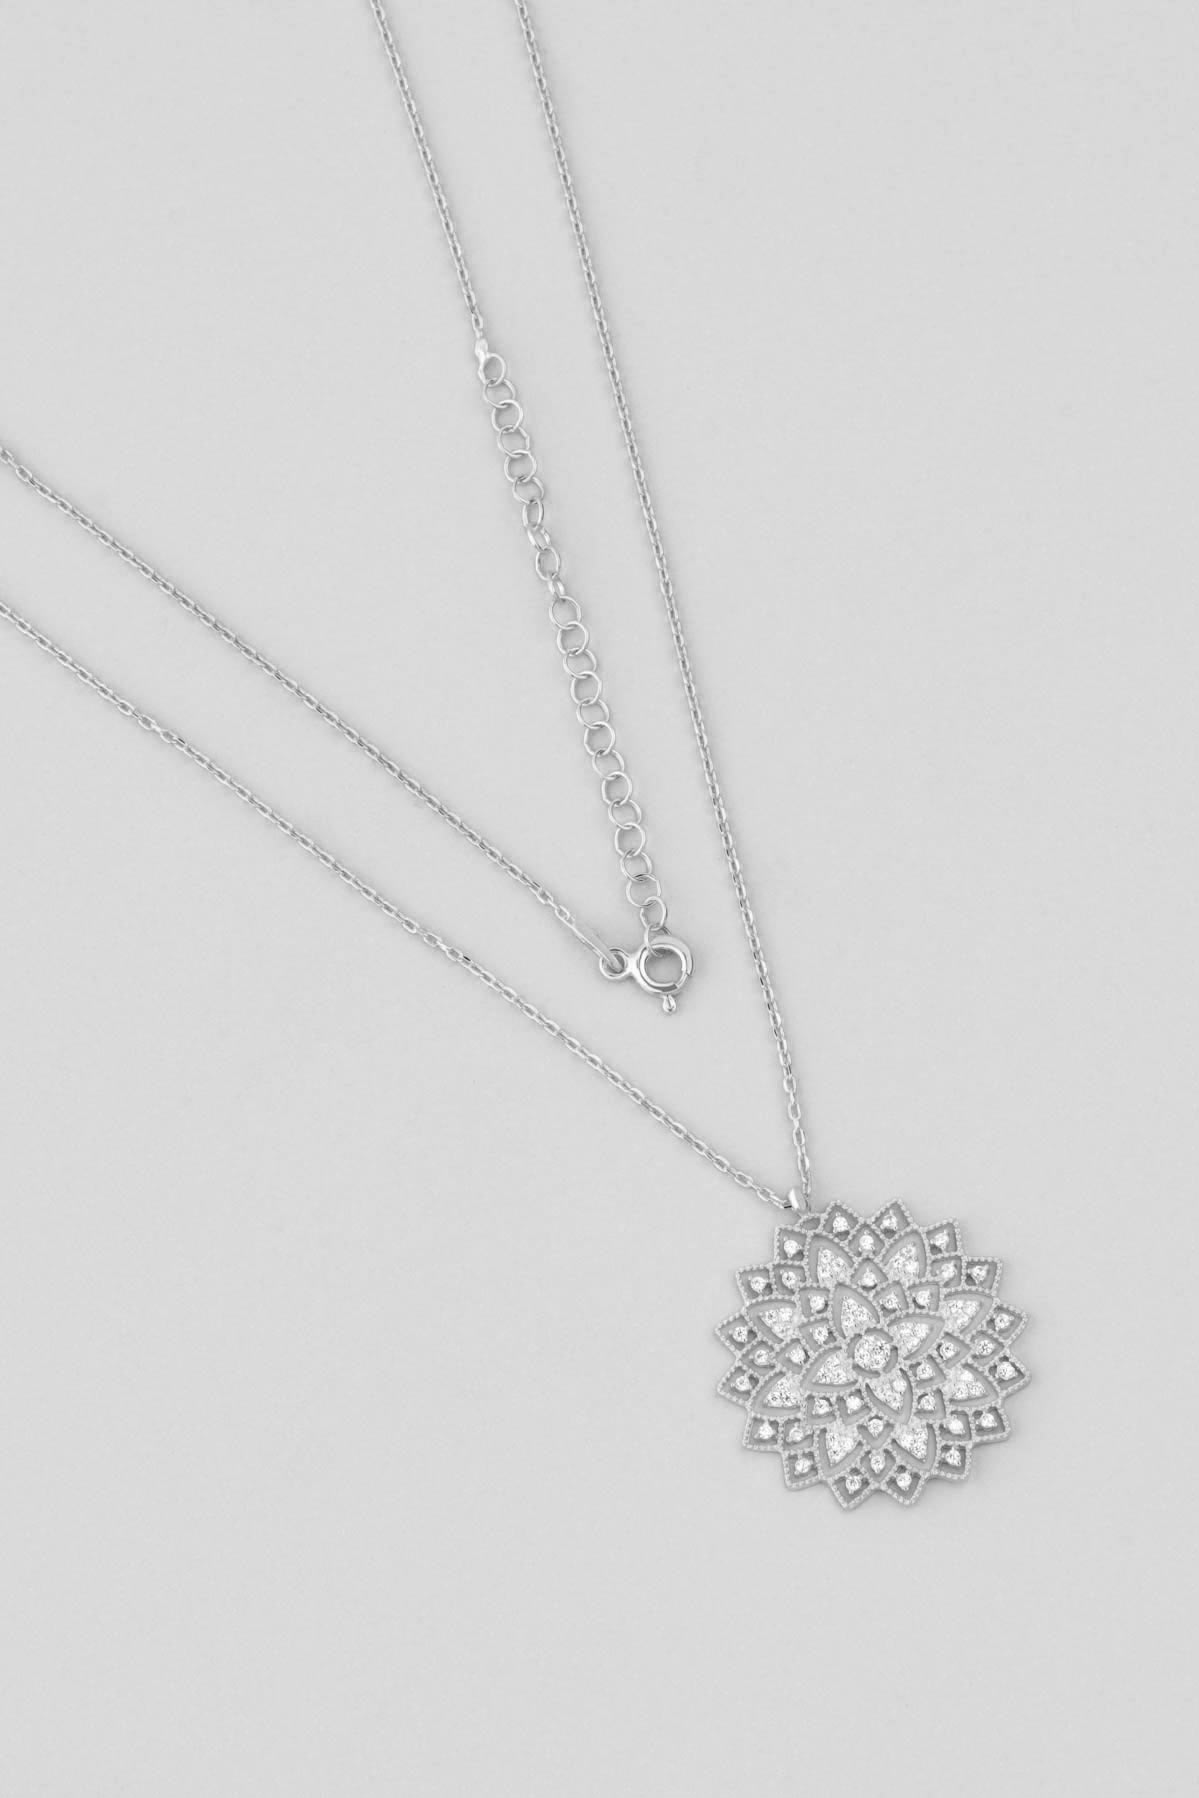 Mandala Desing 18K White Gold Plated Silver Necklace